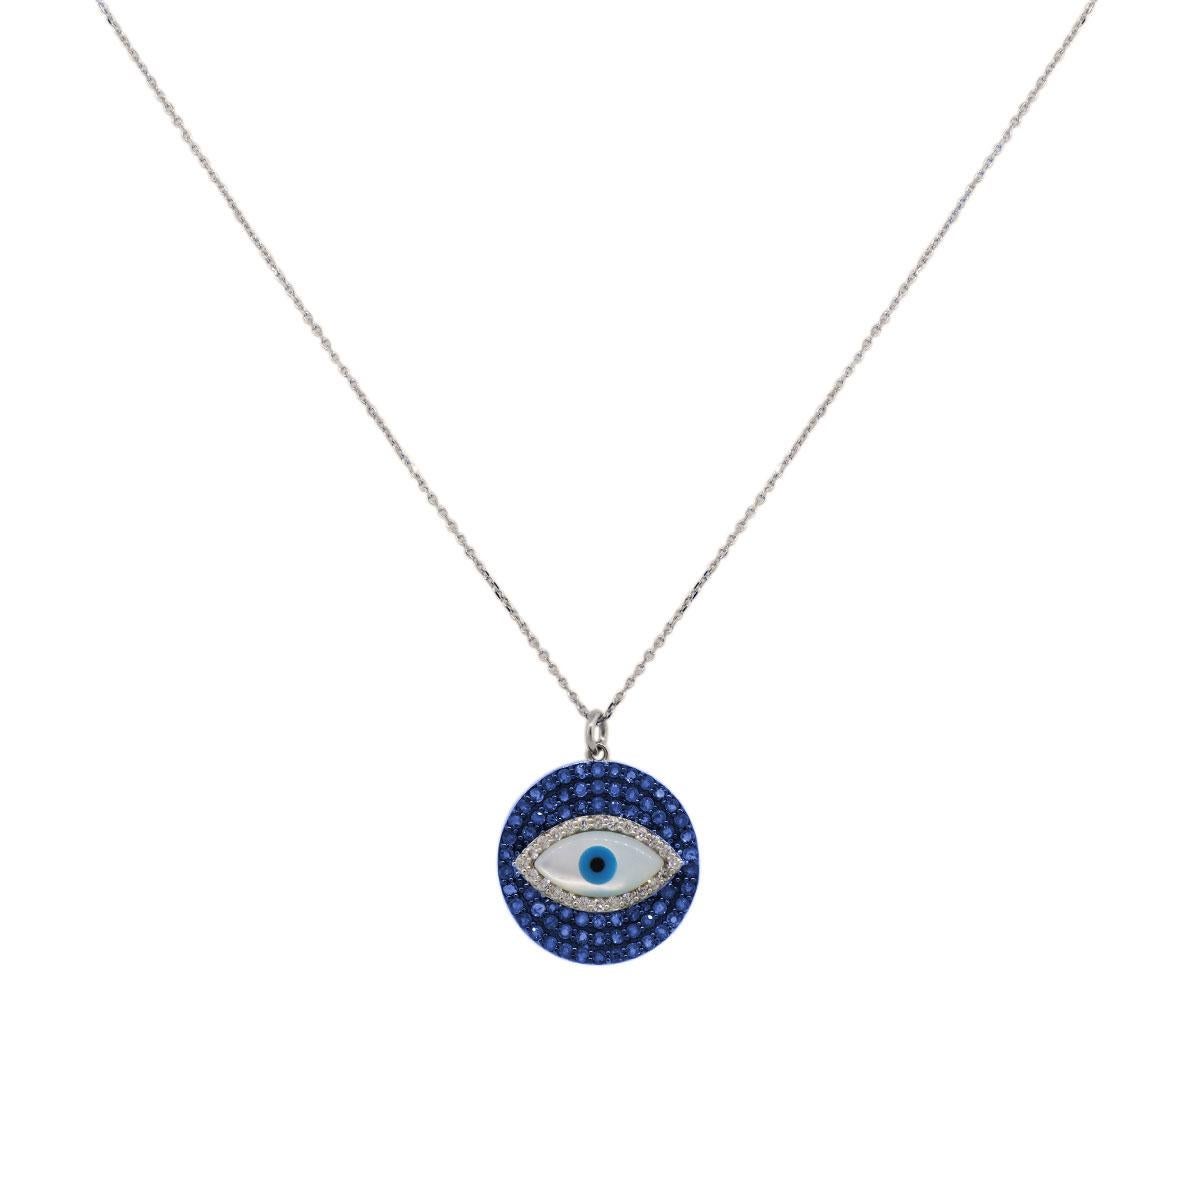 Material: 14k white gold
Diamond Details: Approximately 0.31ctw of round brilliant diamonds. Diamonds are G/H in color and VS in clarity
Gemstone Details: Approximately 1.90ctw of round shape sapphires
Measurements: Necklace measures 17.25″ in